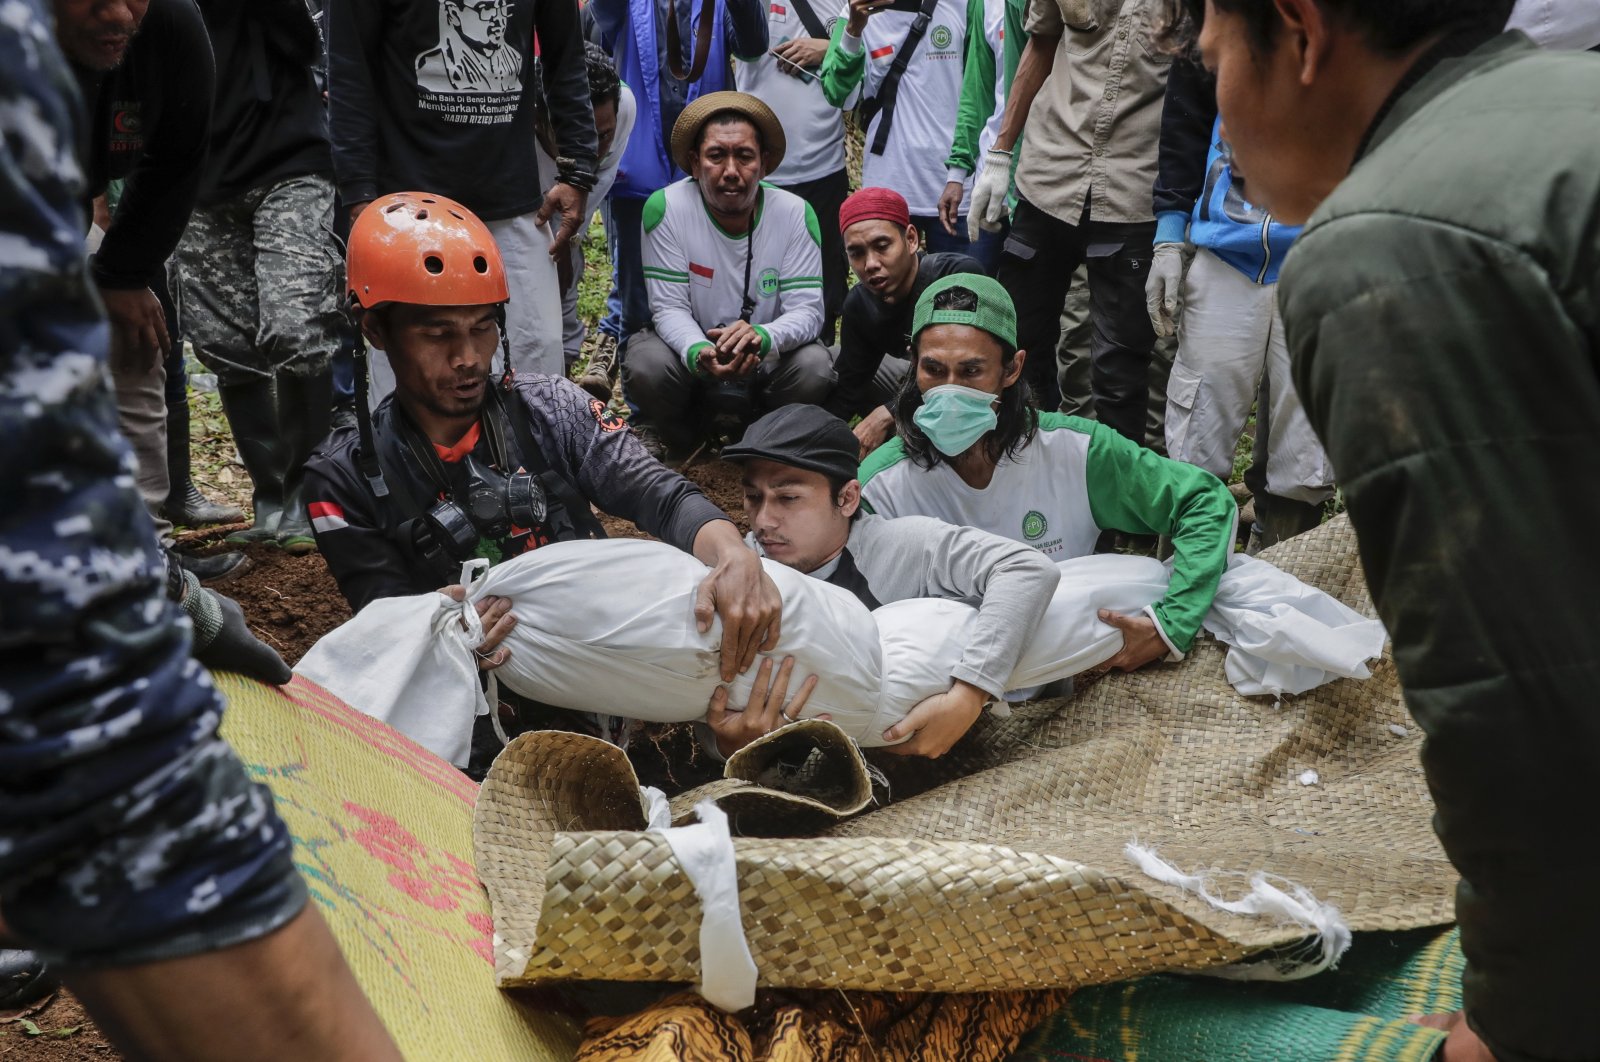 Rescuers and villagers carry the body of a victim during a funeral at a village affected by the 5.6 magnitude earthquake, Cianjur, West Java, Indonesia, Nov. 25, 2022. (EPA Photo)